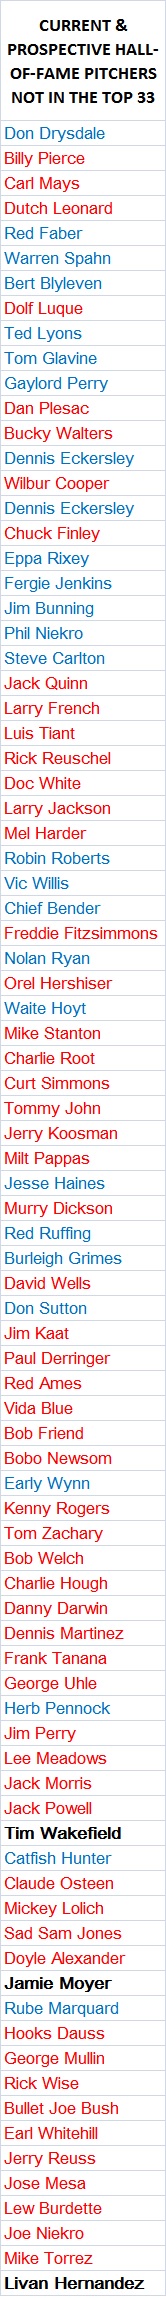 Hall of fame pitchers not in top 33